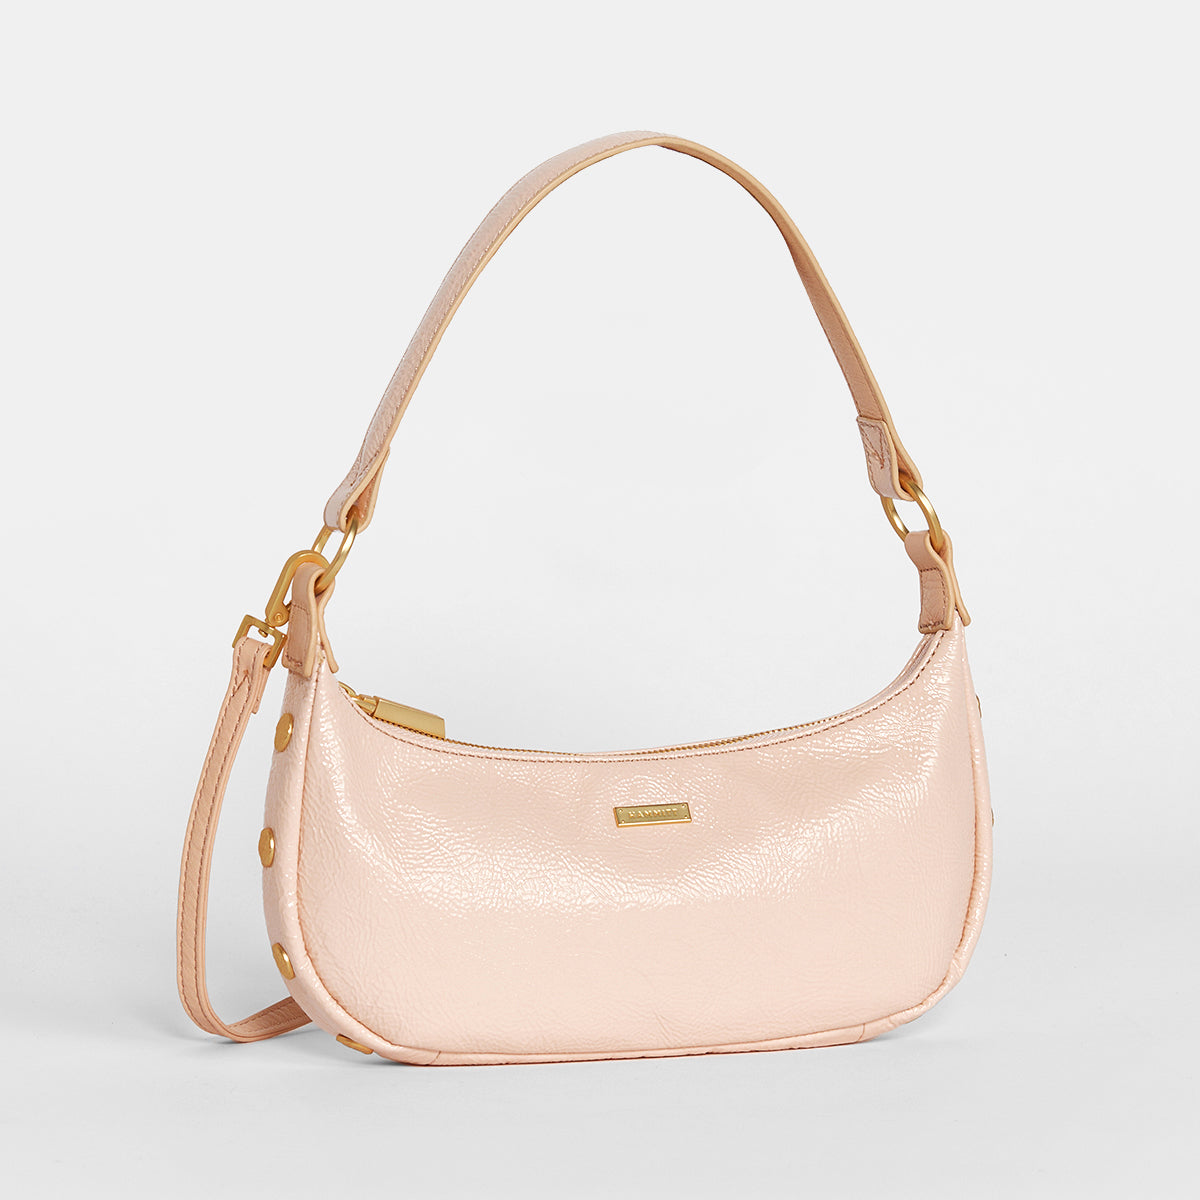 Becker-Sml-Champagne-Pink-Front-View